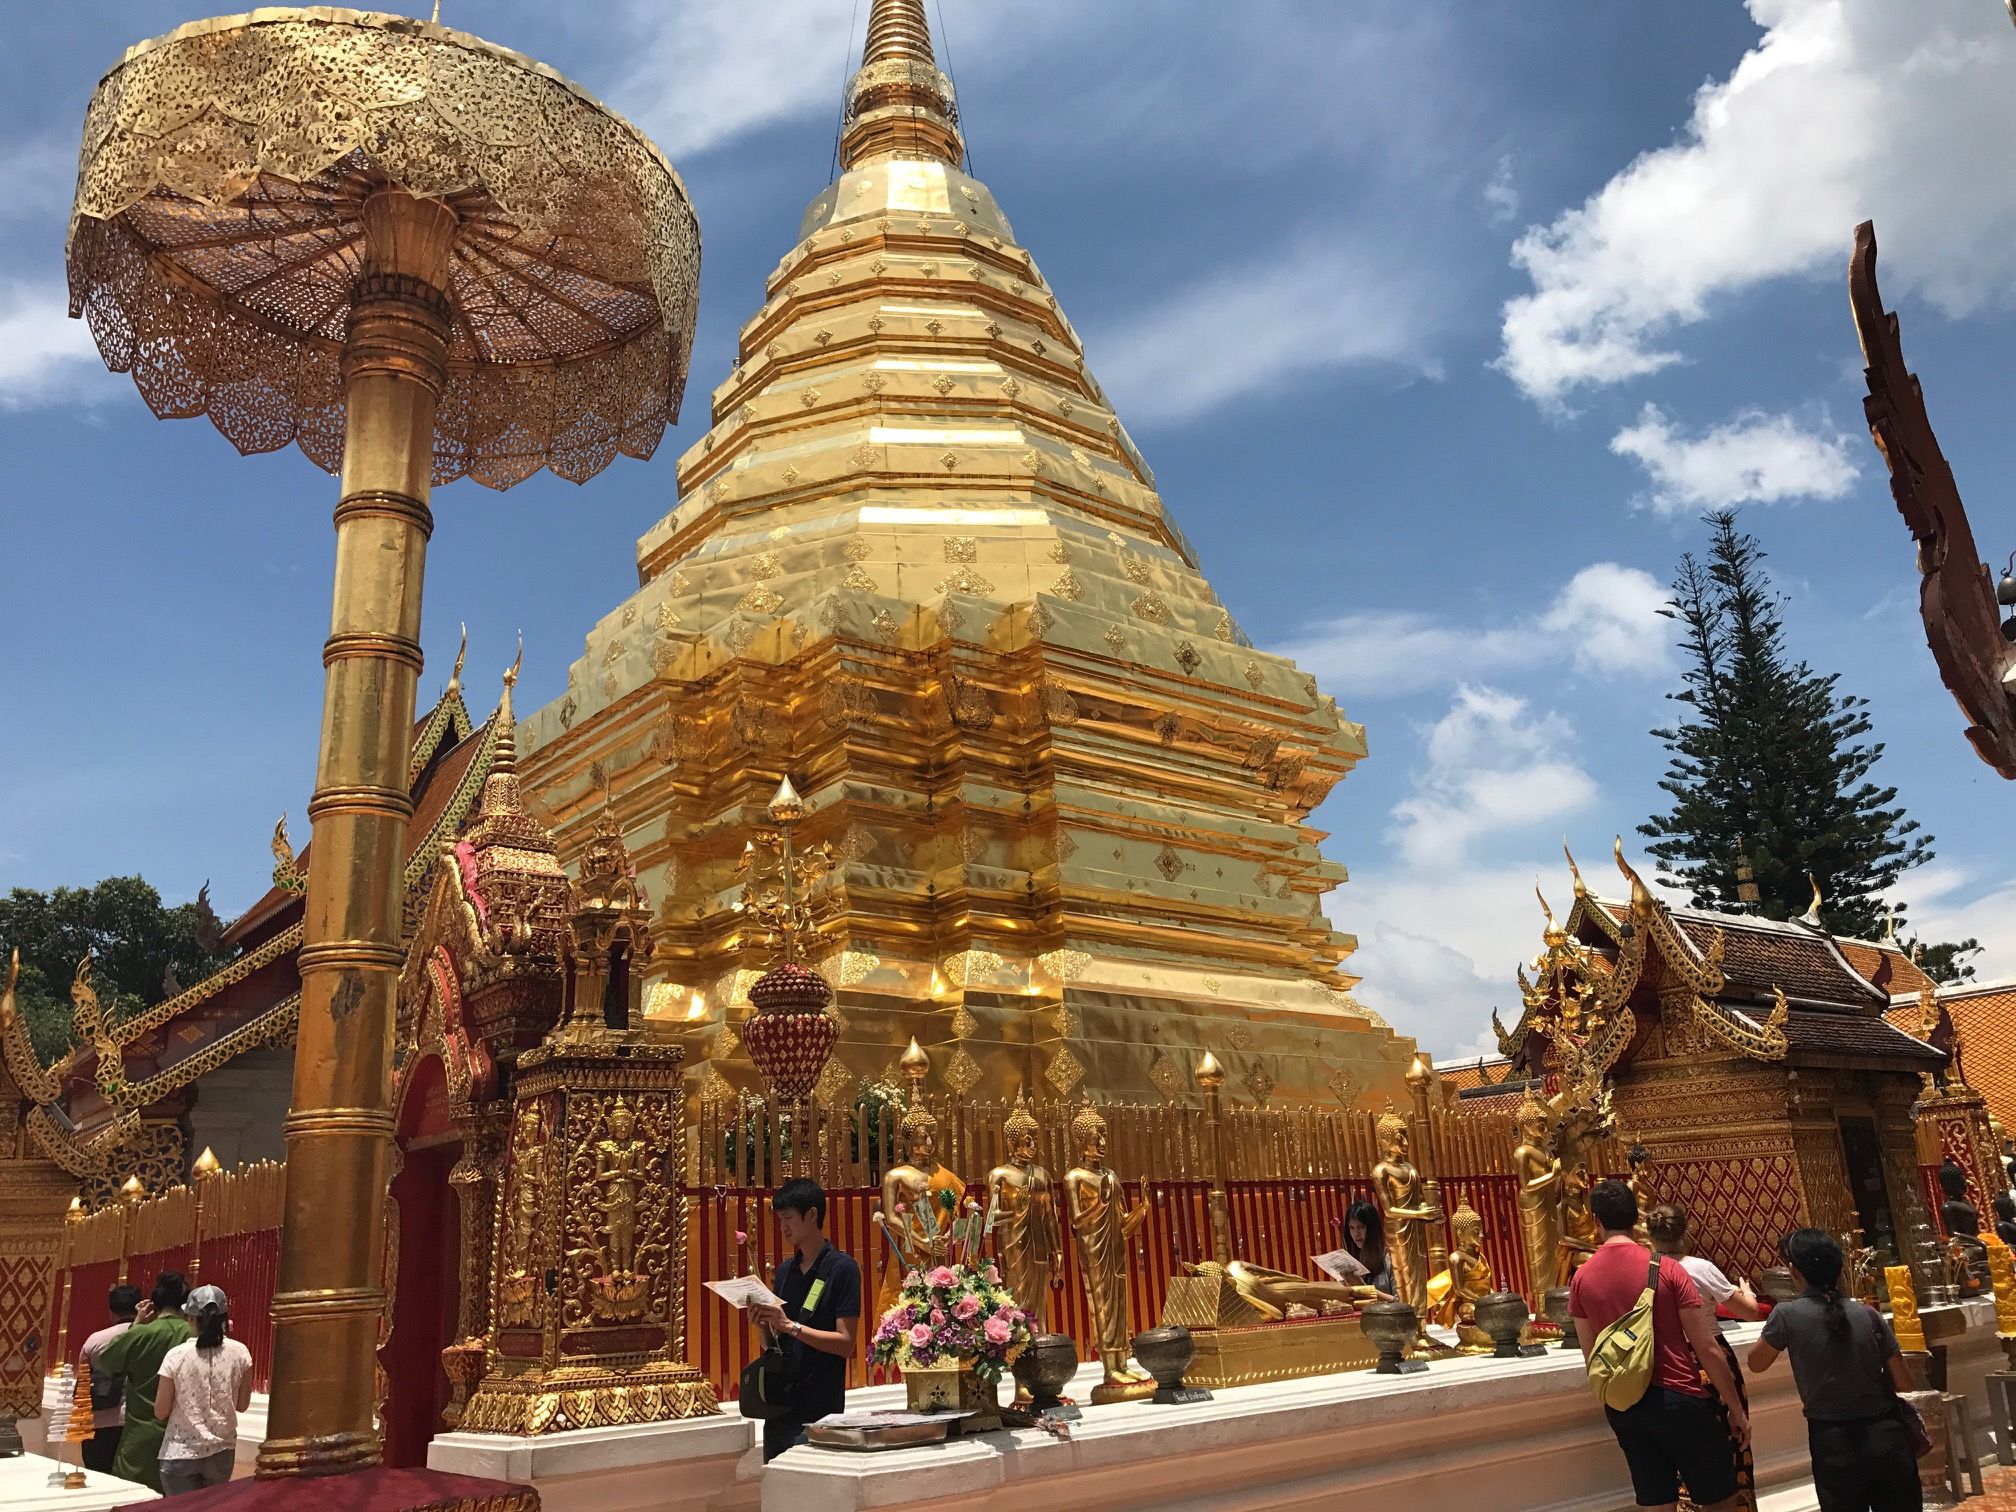 Wat Phra That Doi Suthep, a Buddhist temple found at the top of the Doi Suthep Mountain in Chiang Mai. Image by Kiley Price. Thailand, 2018.